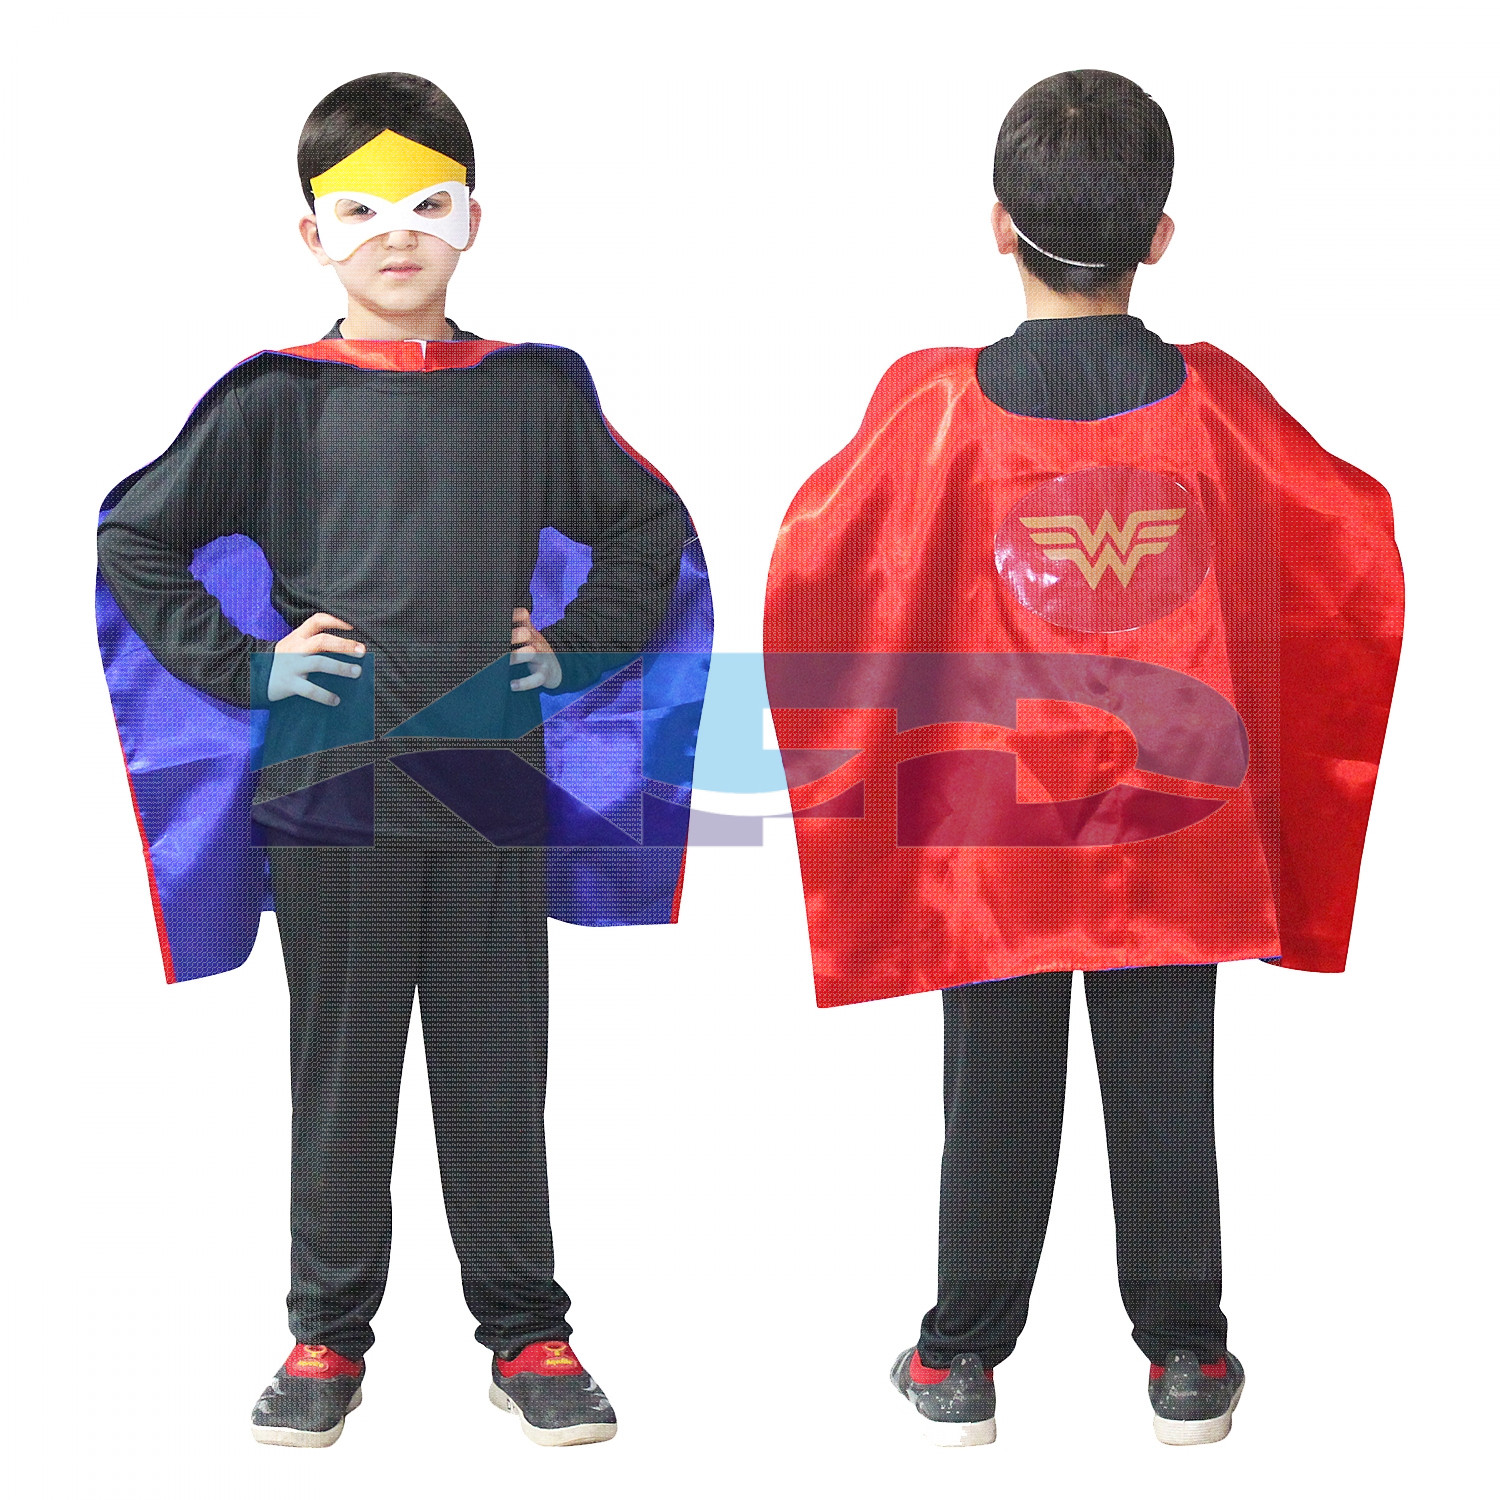 Wonder Girl Robe For Kids/California Costume For kids/Superhero Robe For kids/For Kids Annual function/Theme Party/Competition/Stage Shows/Birthday Party Dress